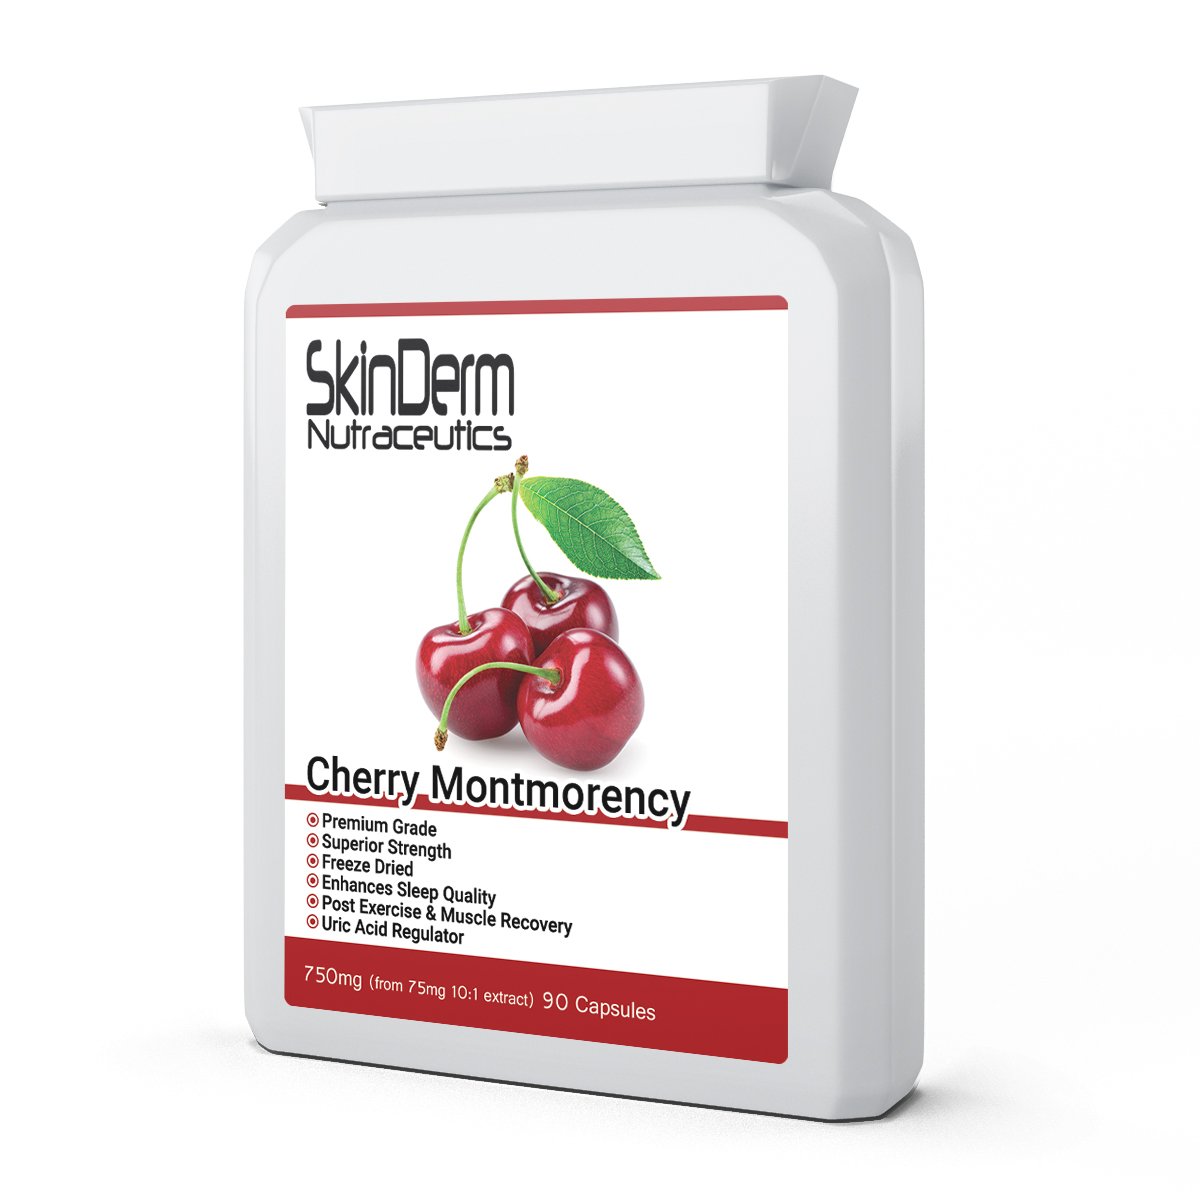 Since the early 21st century the #Montmorencycherry has been popular for its #purported #benefits.#Cherry may help to maintain a #healthy #urinarysystem. @skinderm #Nutraceuticals #MontmorencyCherries capsules are freeze dried and superior quality. Get now bit.ly/2zMXmWj